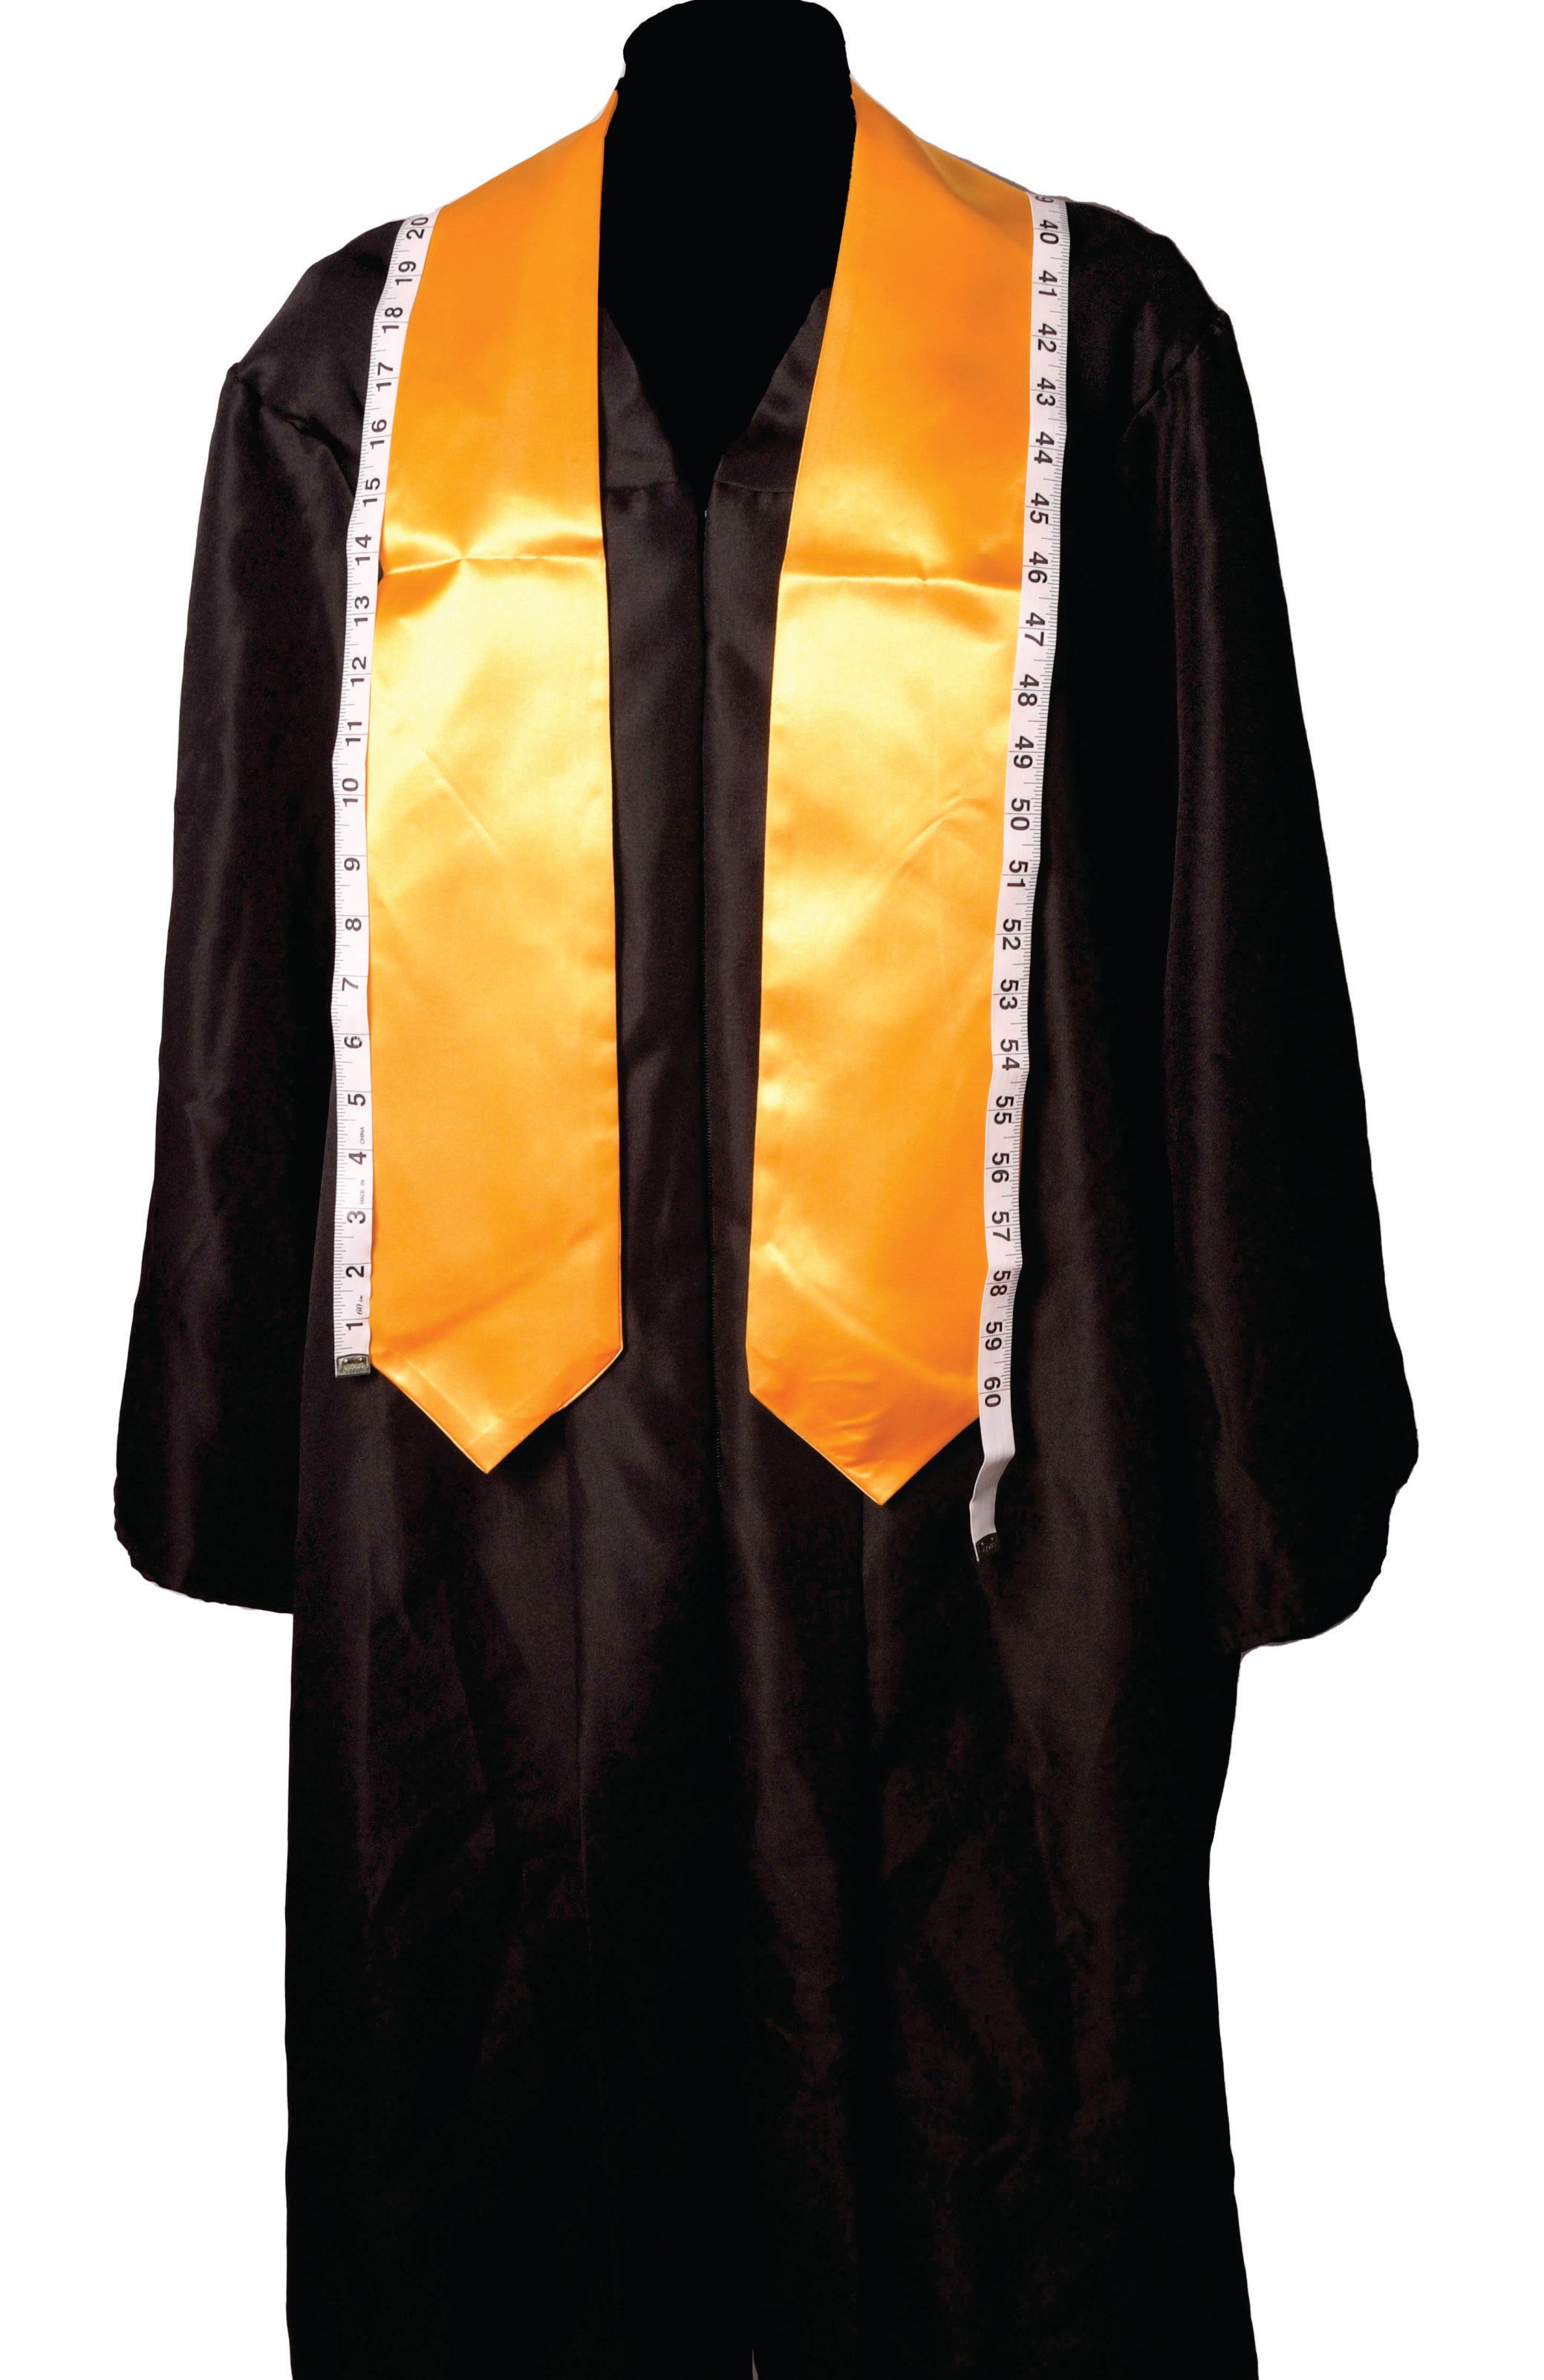 Buy Metallic Gold Graduation Honor Cords as low as $1.75 from